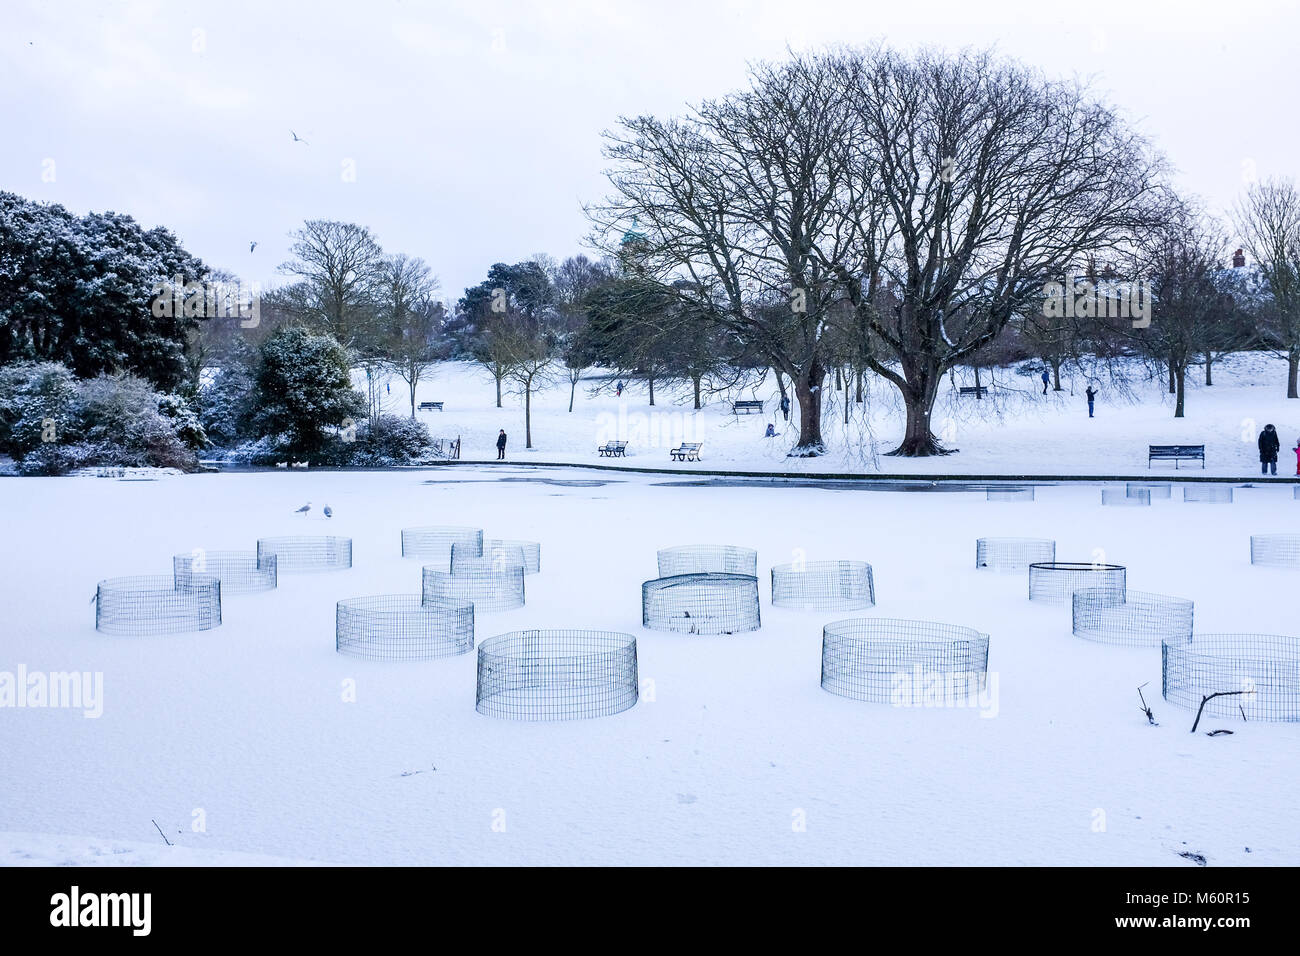 Brighton, UK. 27th Feb, 2018. UK Weather: Snow in Queens Park Brighton today as the 'Beast of the East' snow storms spread across Britain today with more snow and freezing weather forecast for the rest of the week Photograph taken by Simon Dack Credit: Simon Dack/Alamy Live News Stock Photo